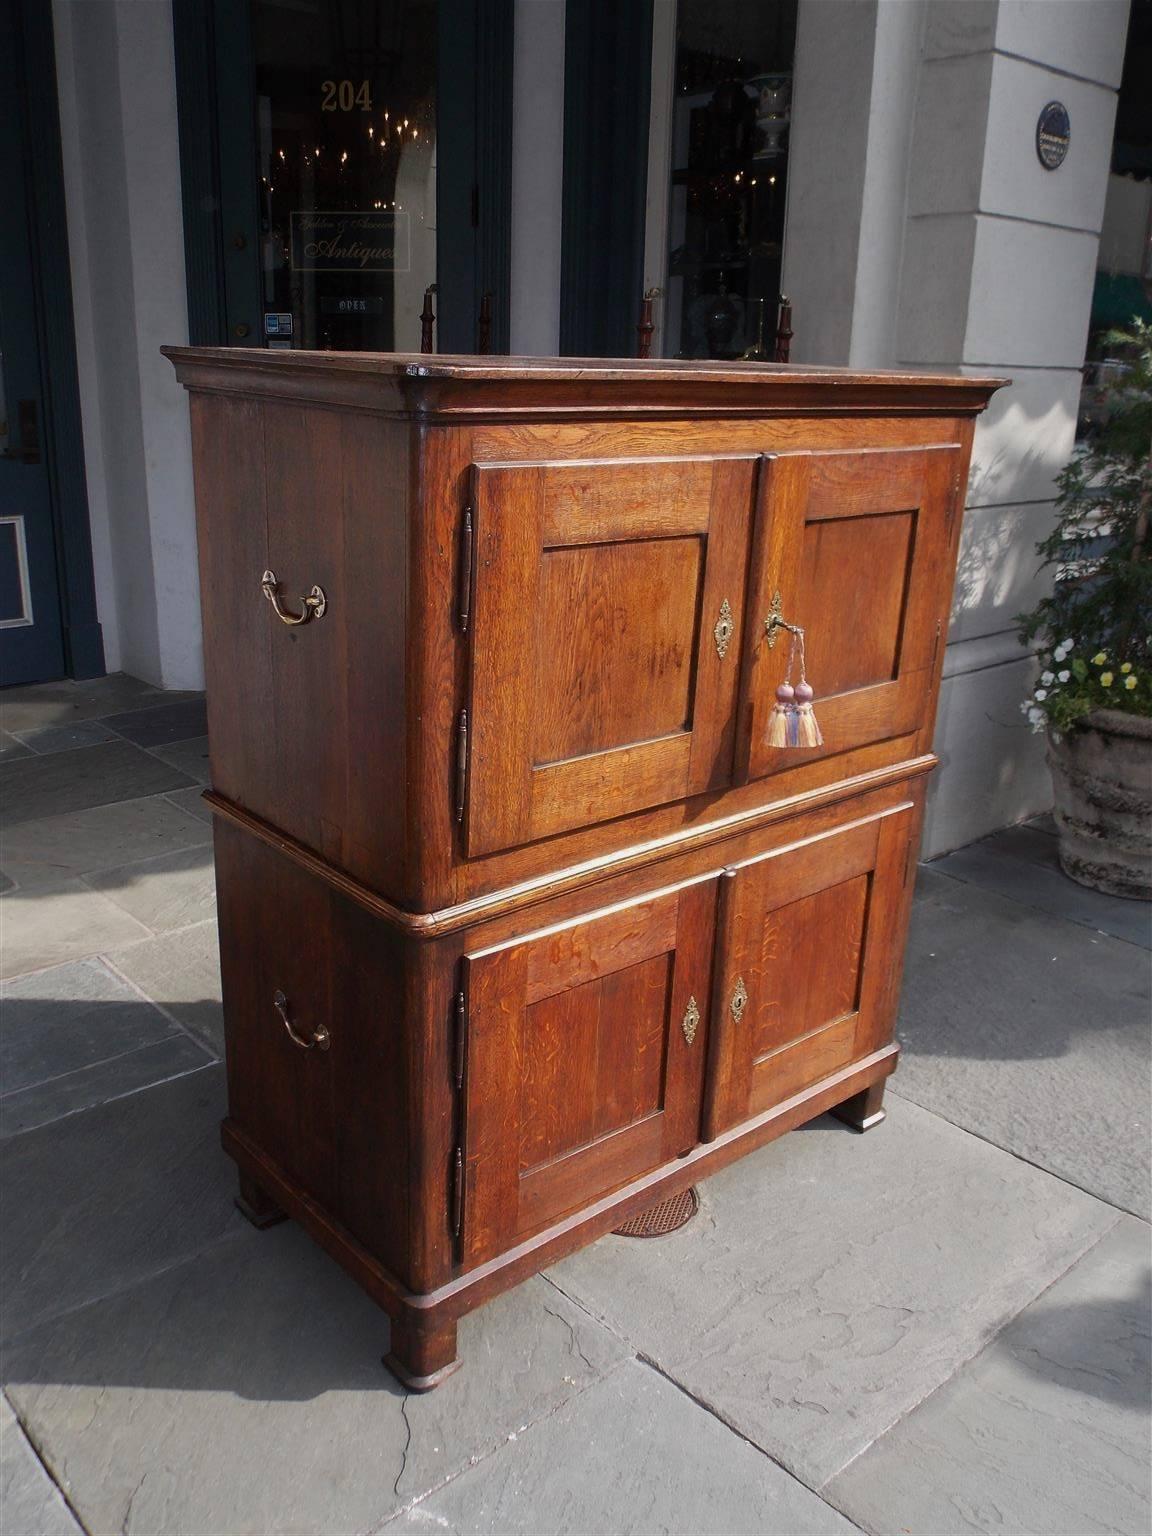 English oak two-piece military Campaign cabinet with a carved molded edge cornice, exposed dovetailing, original brass side handles, hinged upper and lower case doors, fitted interior shelves, original locking mechanisms, and terminating on the